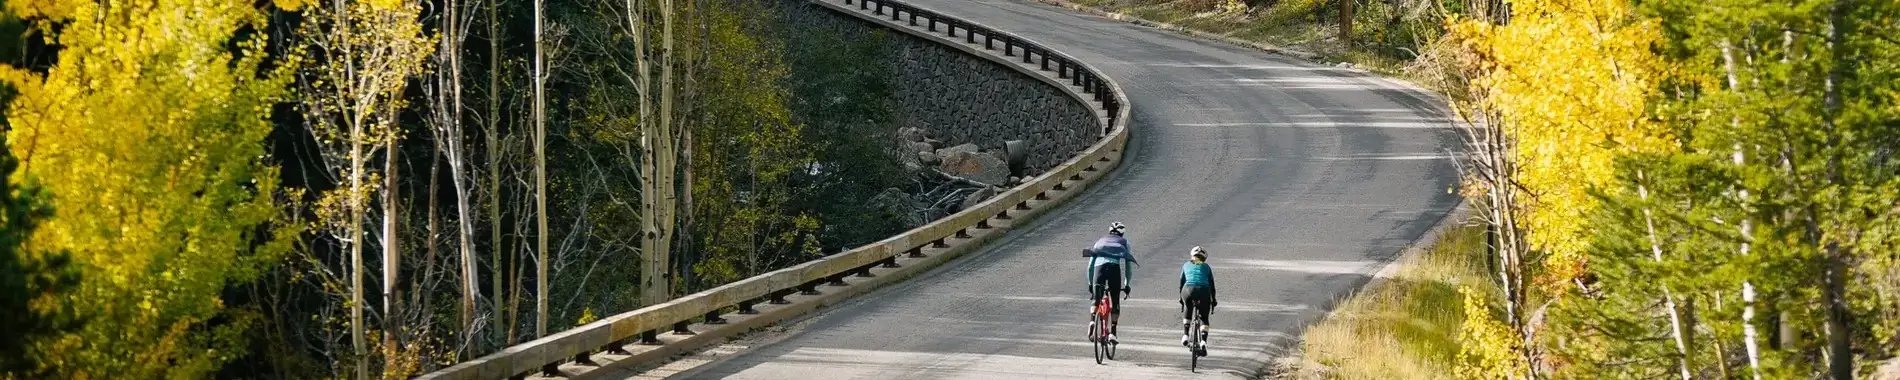 Two road cyclist riding on a mountain road in PEARL iZUMi kits